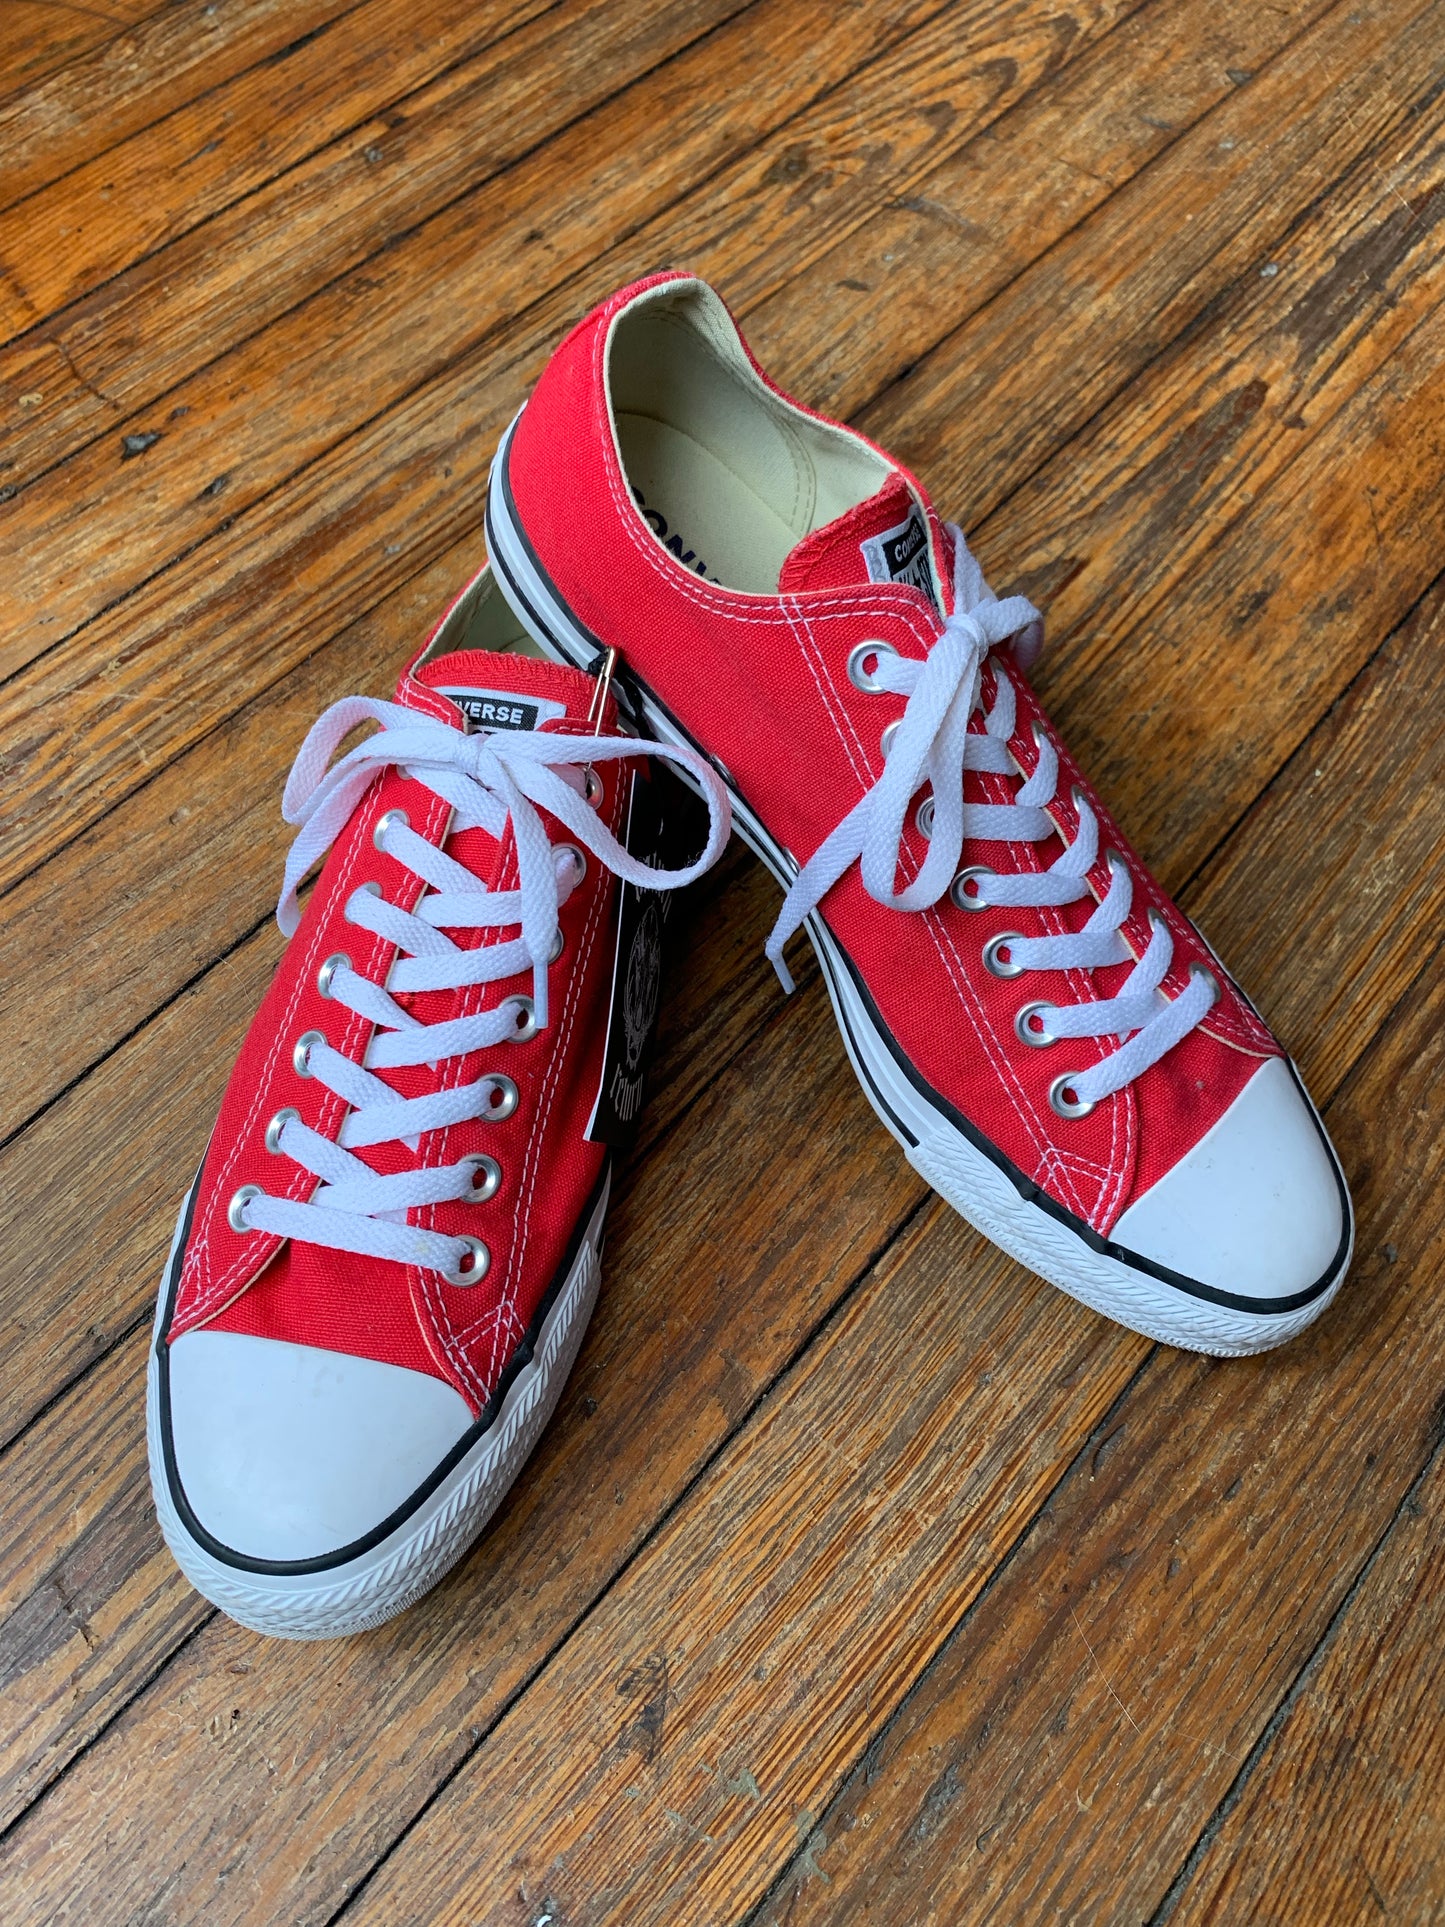 Red Low Top Converse Chuck Taylor Sneakers